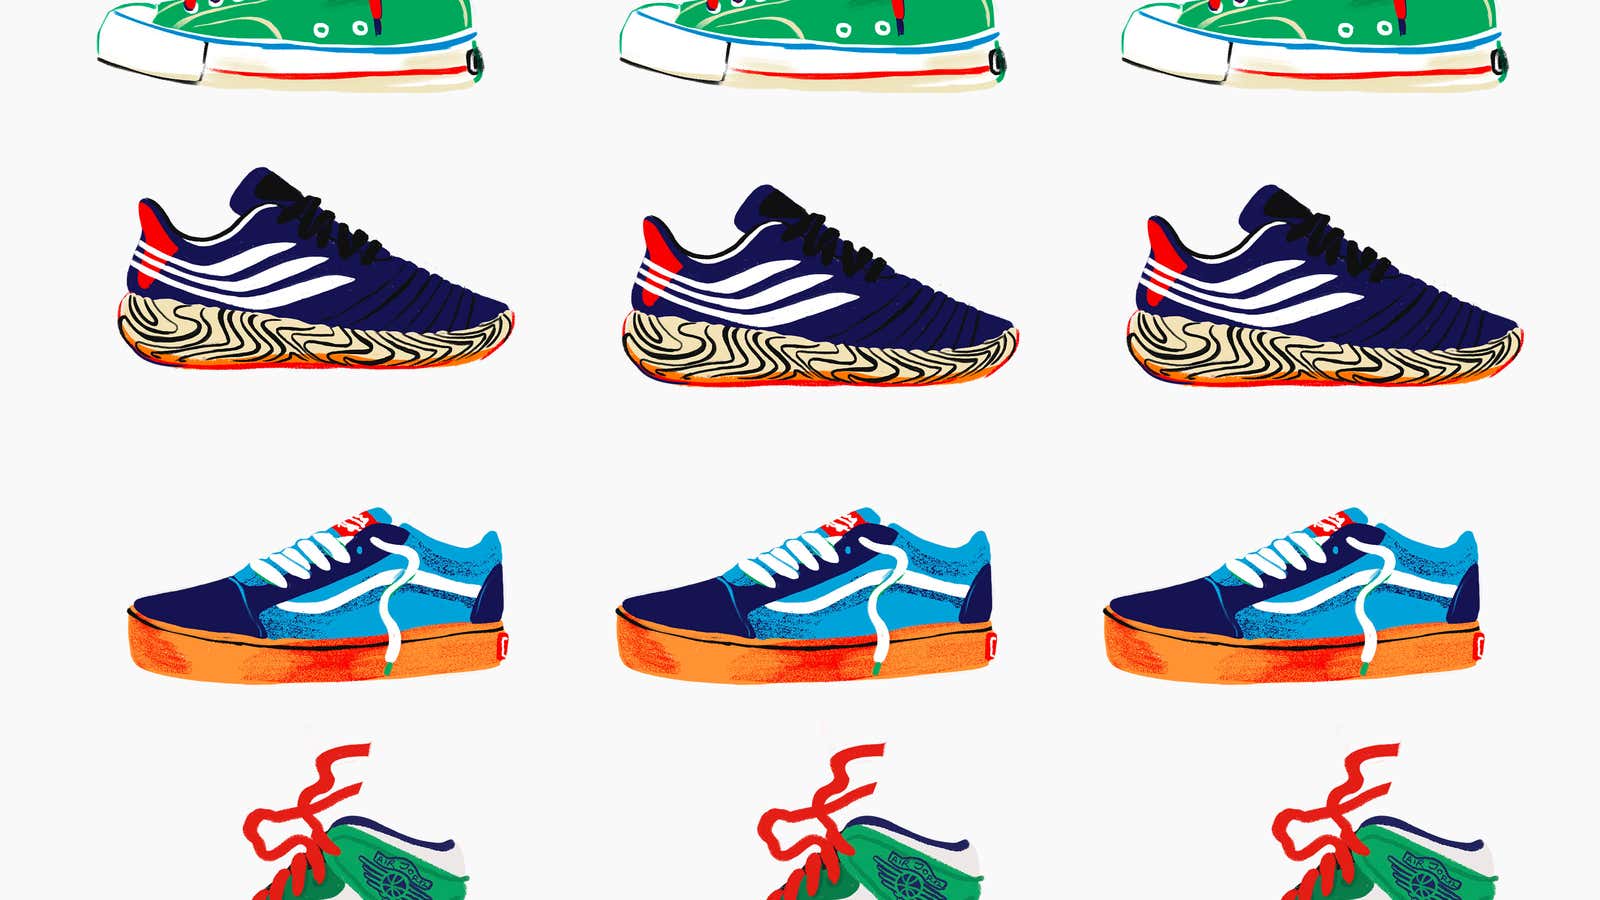 Everything you need to keep up with sneakers